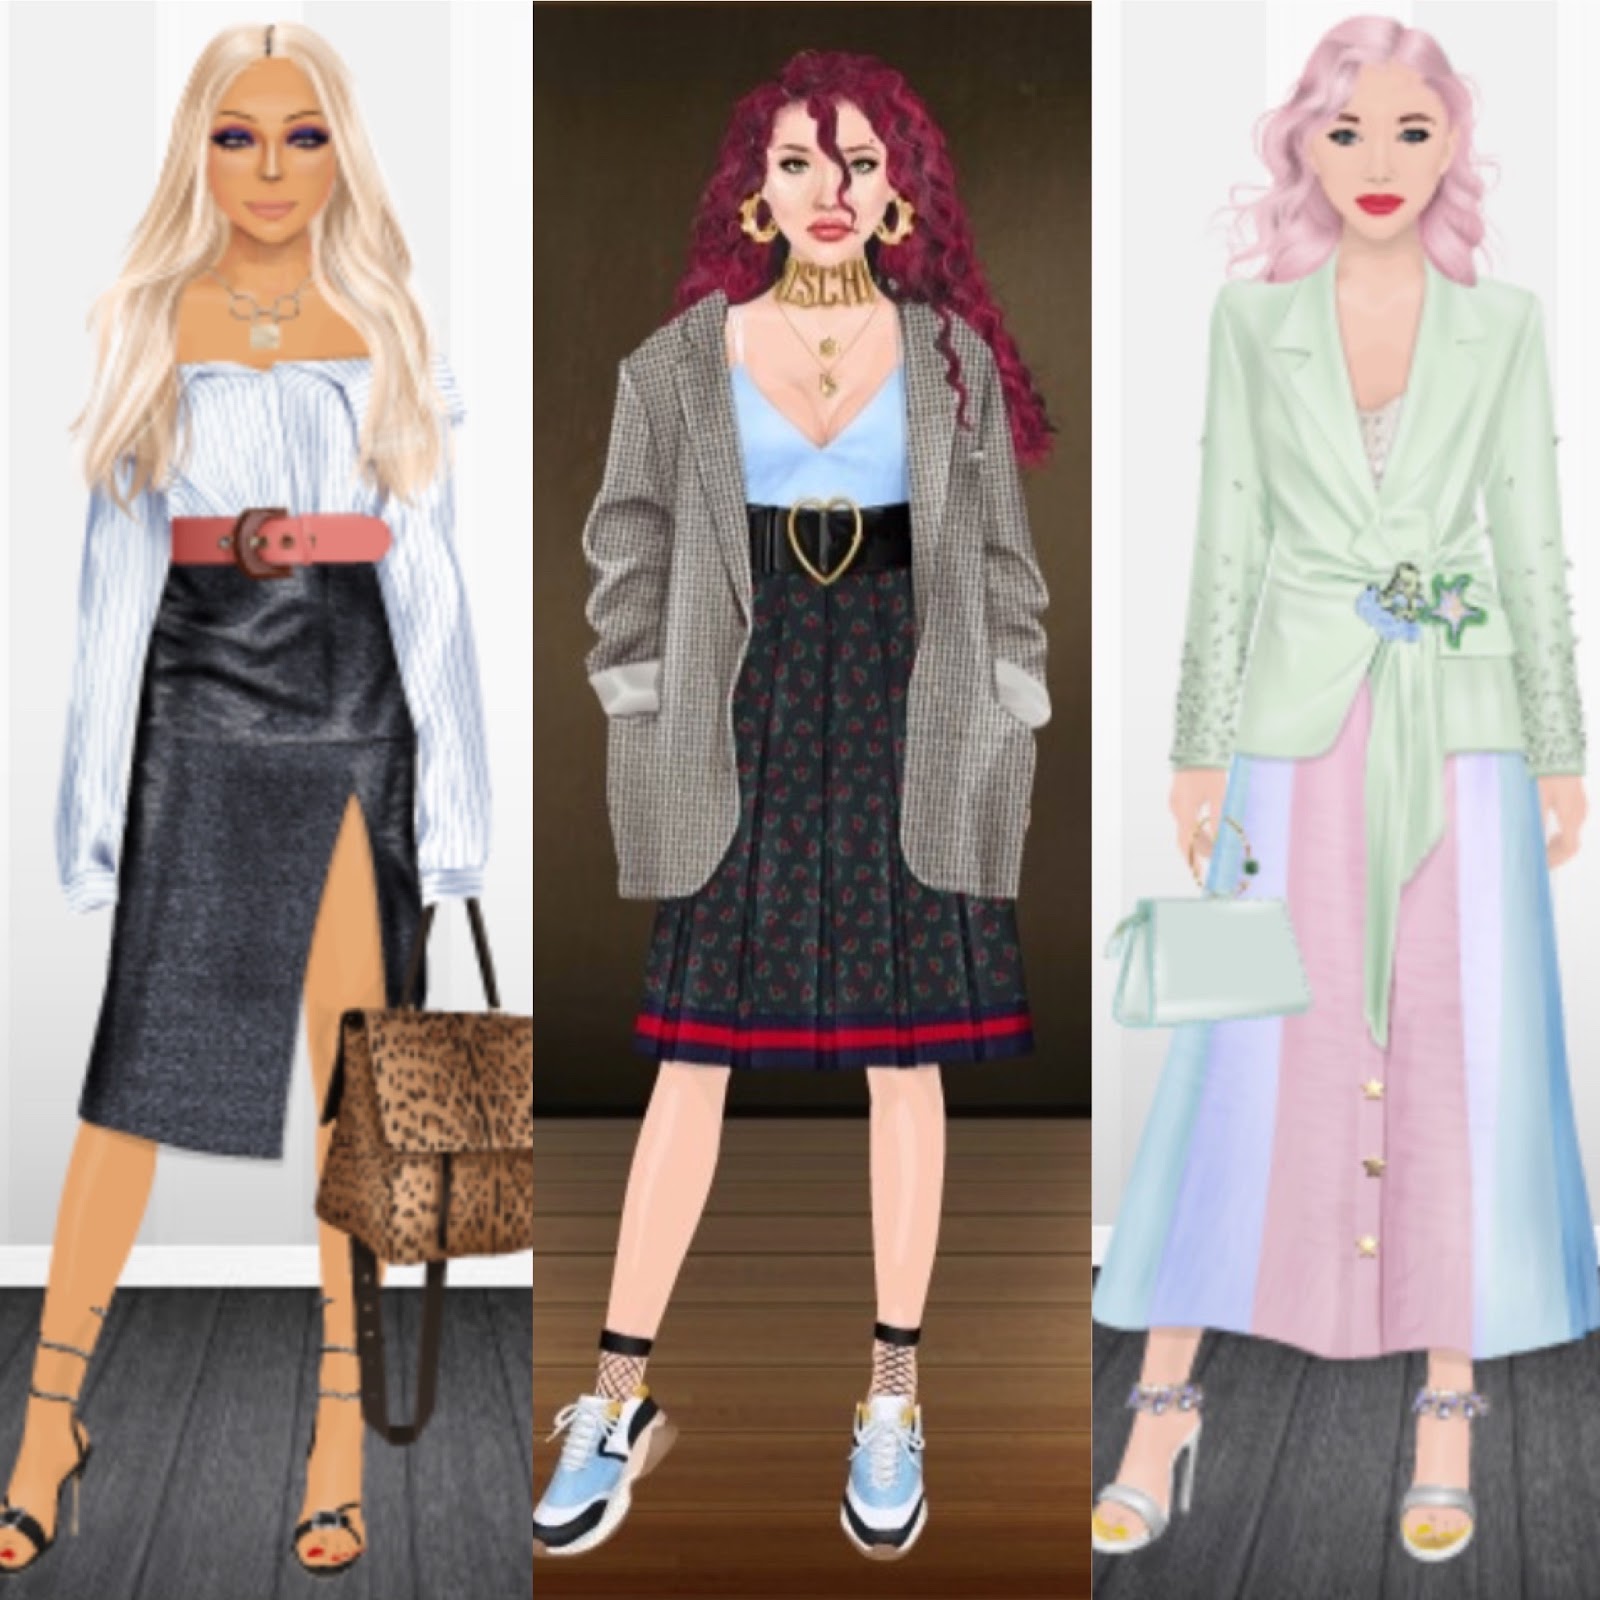 Rio Chicas Poll (Closed and Winner Announced) | Stardoll's Most Wanted...